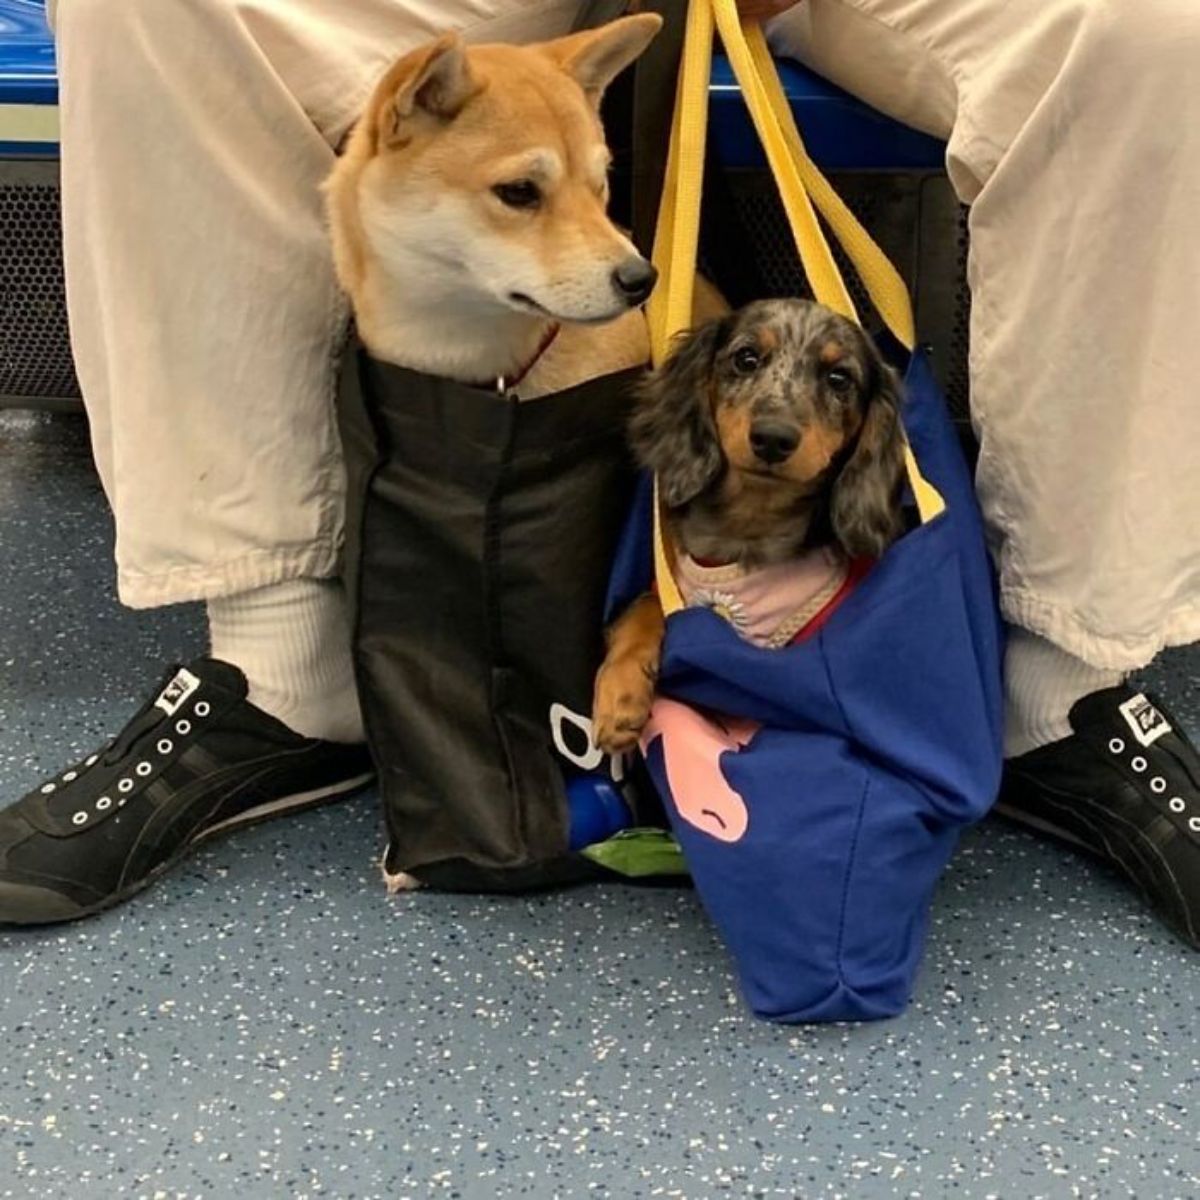 a brown shiba inu in a black tote and a fluffy black and brown dachshund in a blue tote on the floor between a person's feet